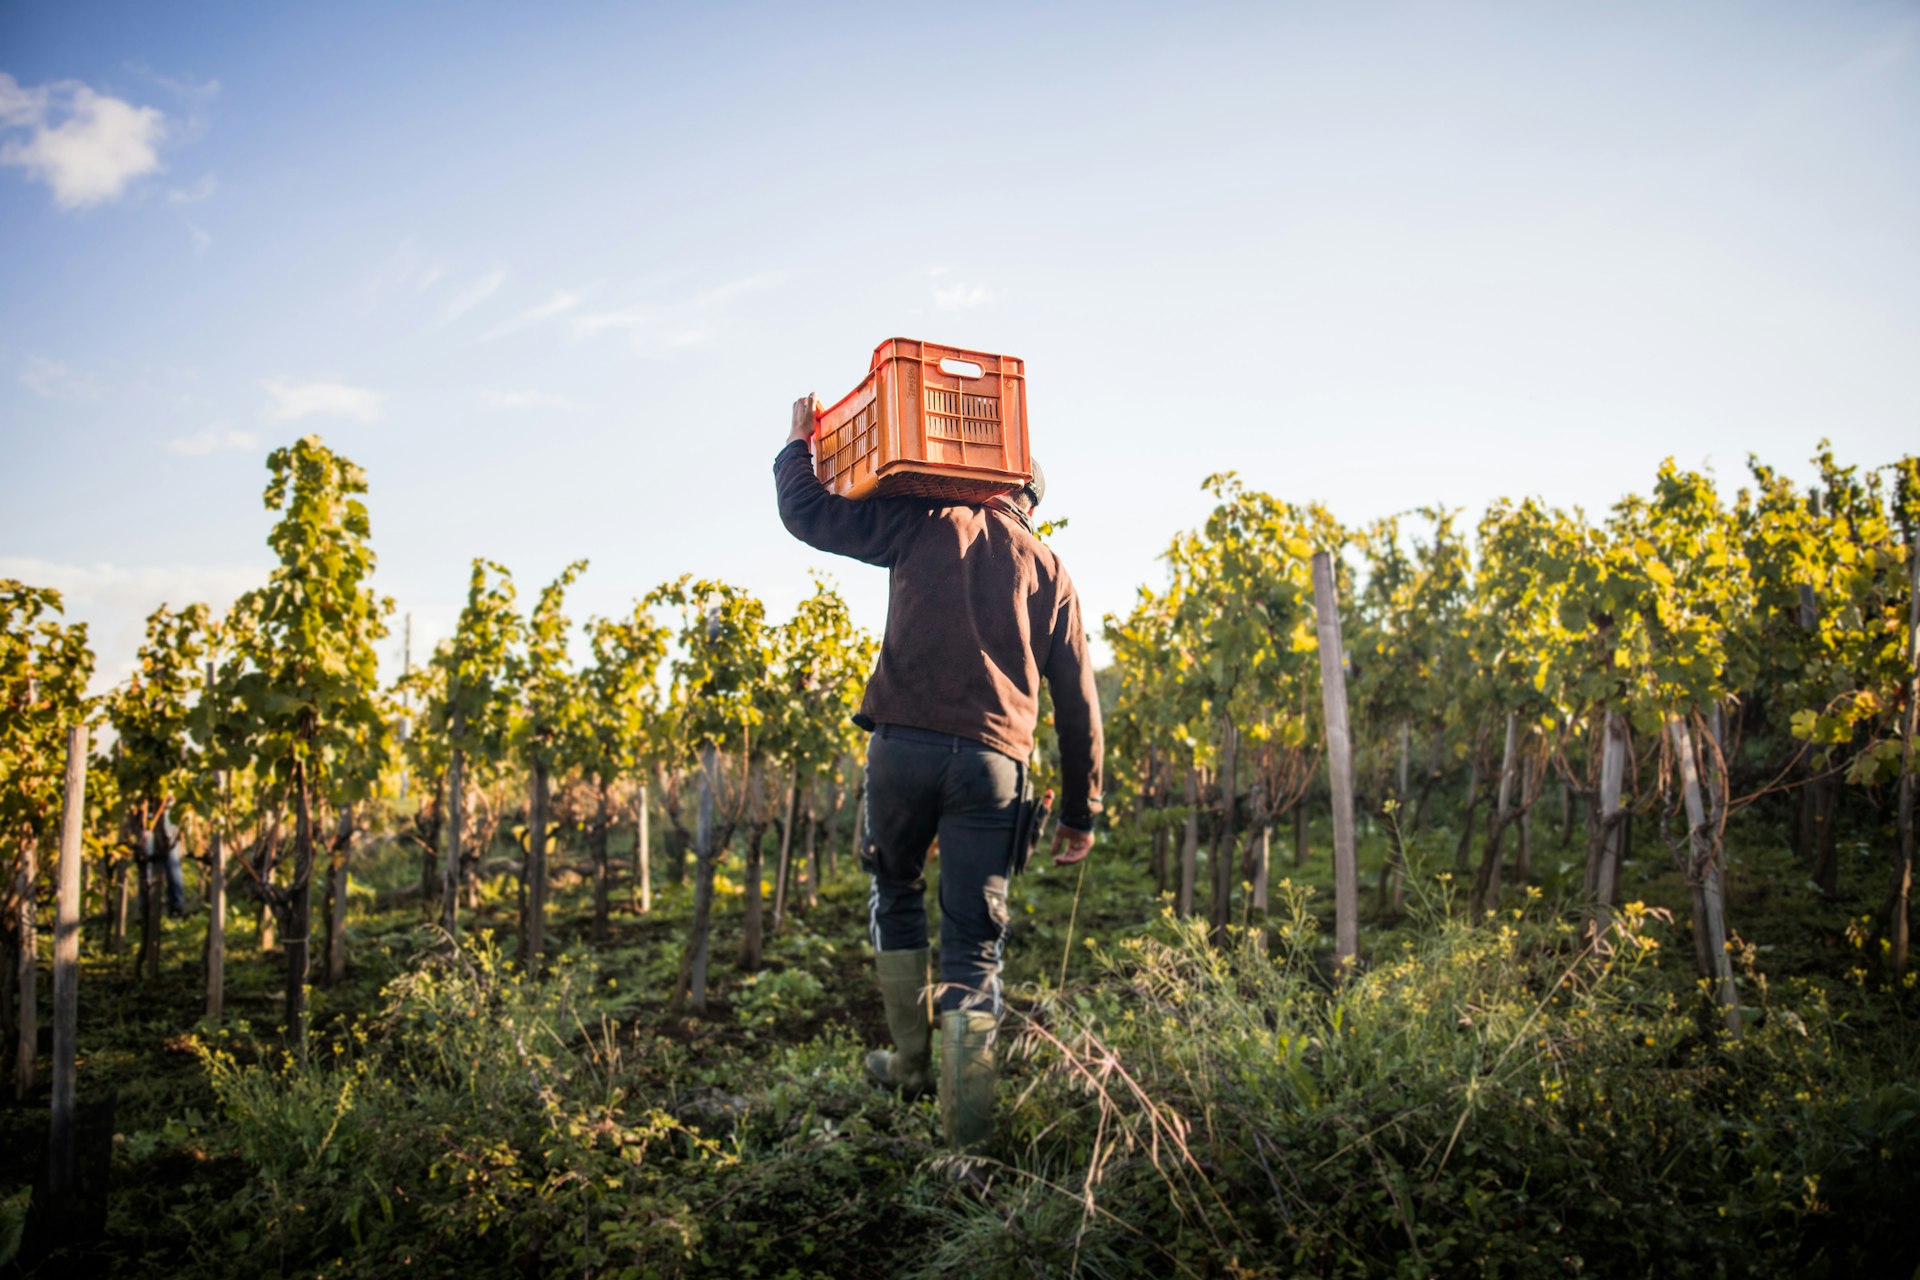 A man carries a tray on his shoulder as he walks through a vineyard on an autumn day ahead of the harvest